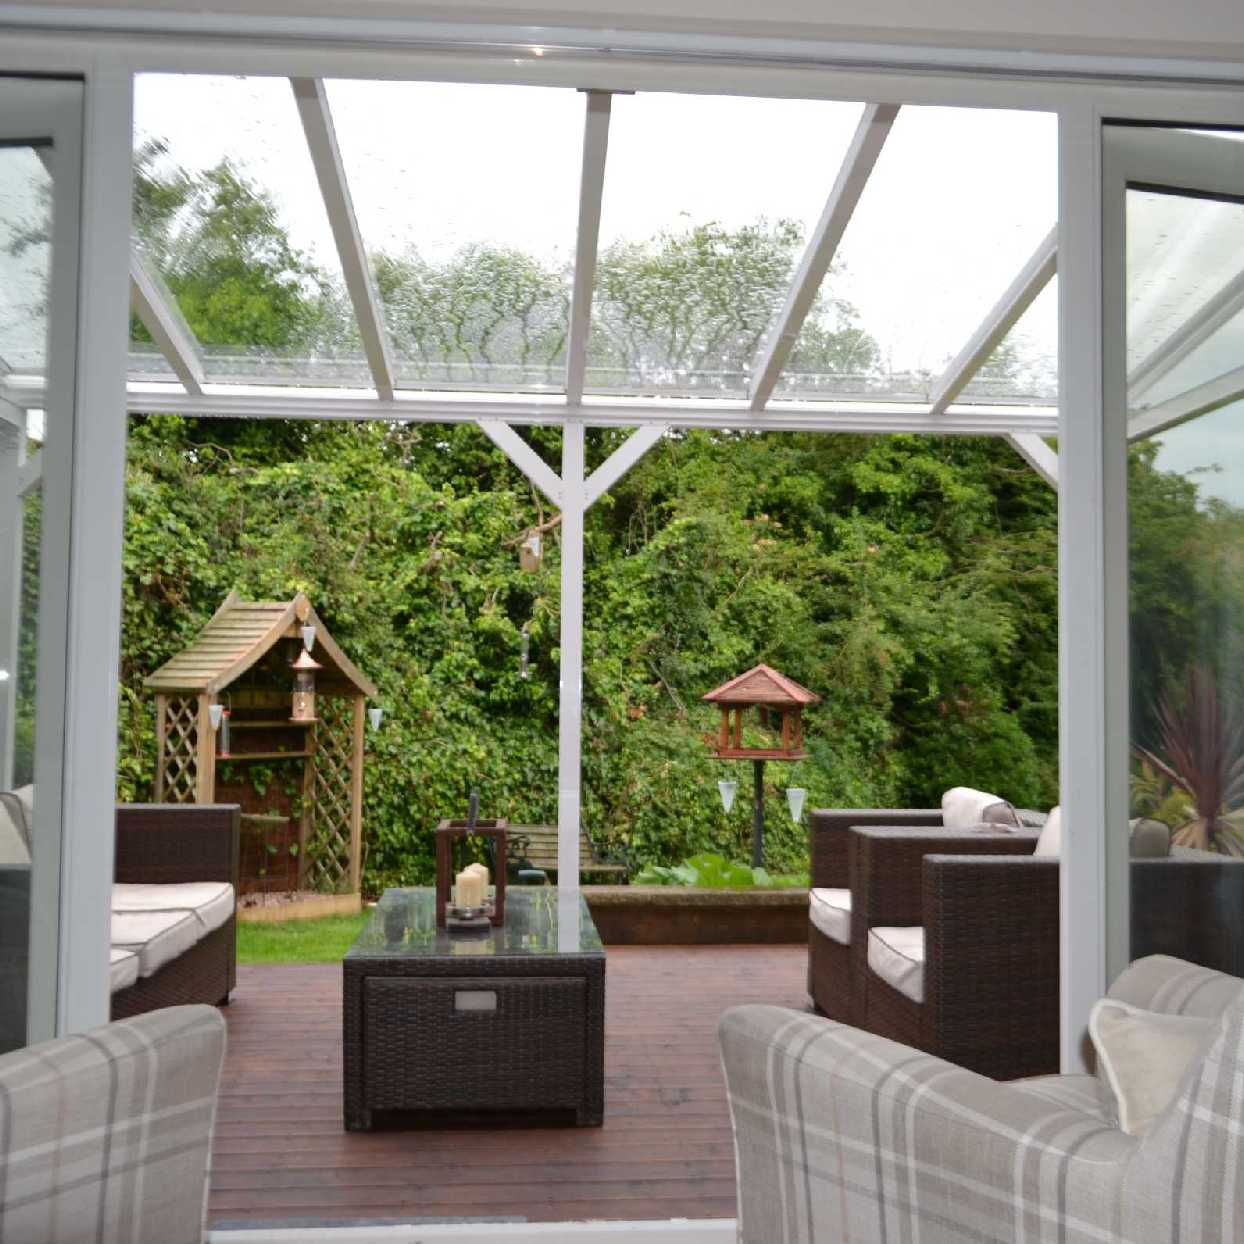 Buy Omega Smart Free-Standing, White MonoPitch Roof Canopy with 6mm Glass Clear Plate Polycarbonate Glazing - 2.8m (W) x 2.5m (P), (4) Supporting Posts online today